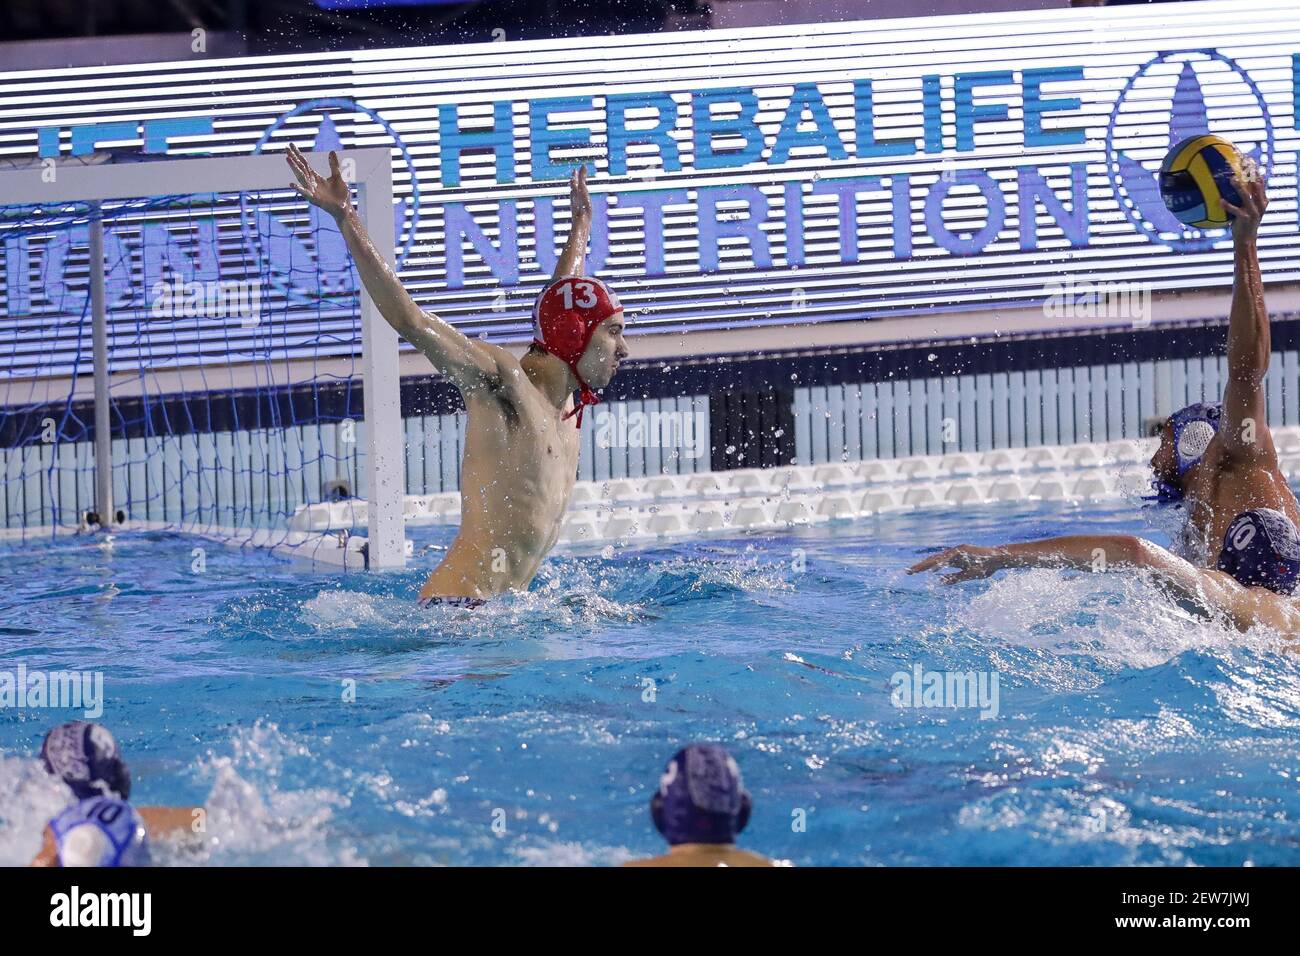 Rome, Italy. 02nd Mar, 2021. Antonio Vukojevic (Jug Adriatic) during Preliminary Round II - Pro Recco vs Jug Adriatic, LEN Cup - Champions League waterpolo match in Rome, Italy, March 02 2021 Credit: Independent Photo Agency/Alamy Live News Stock Photo